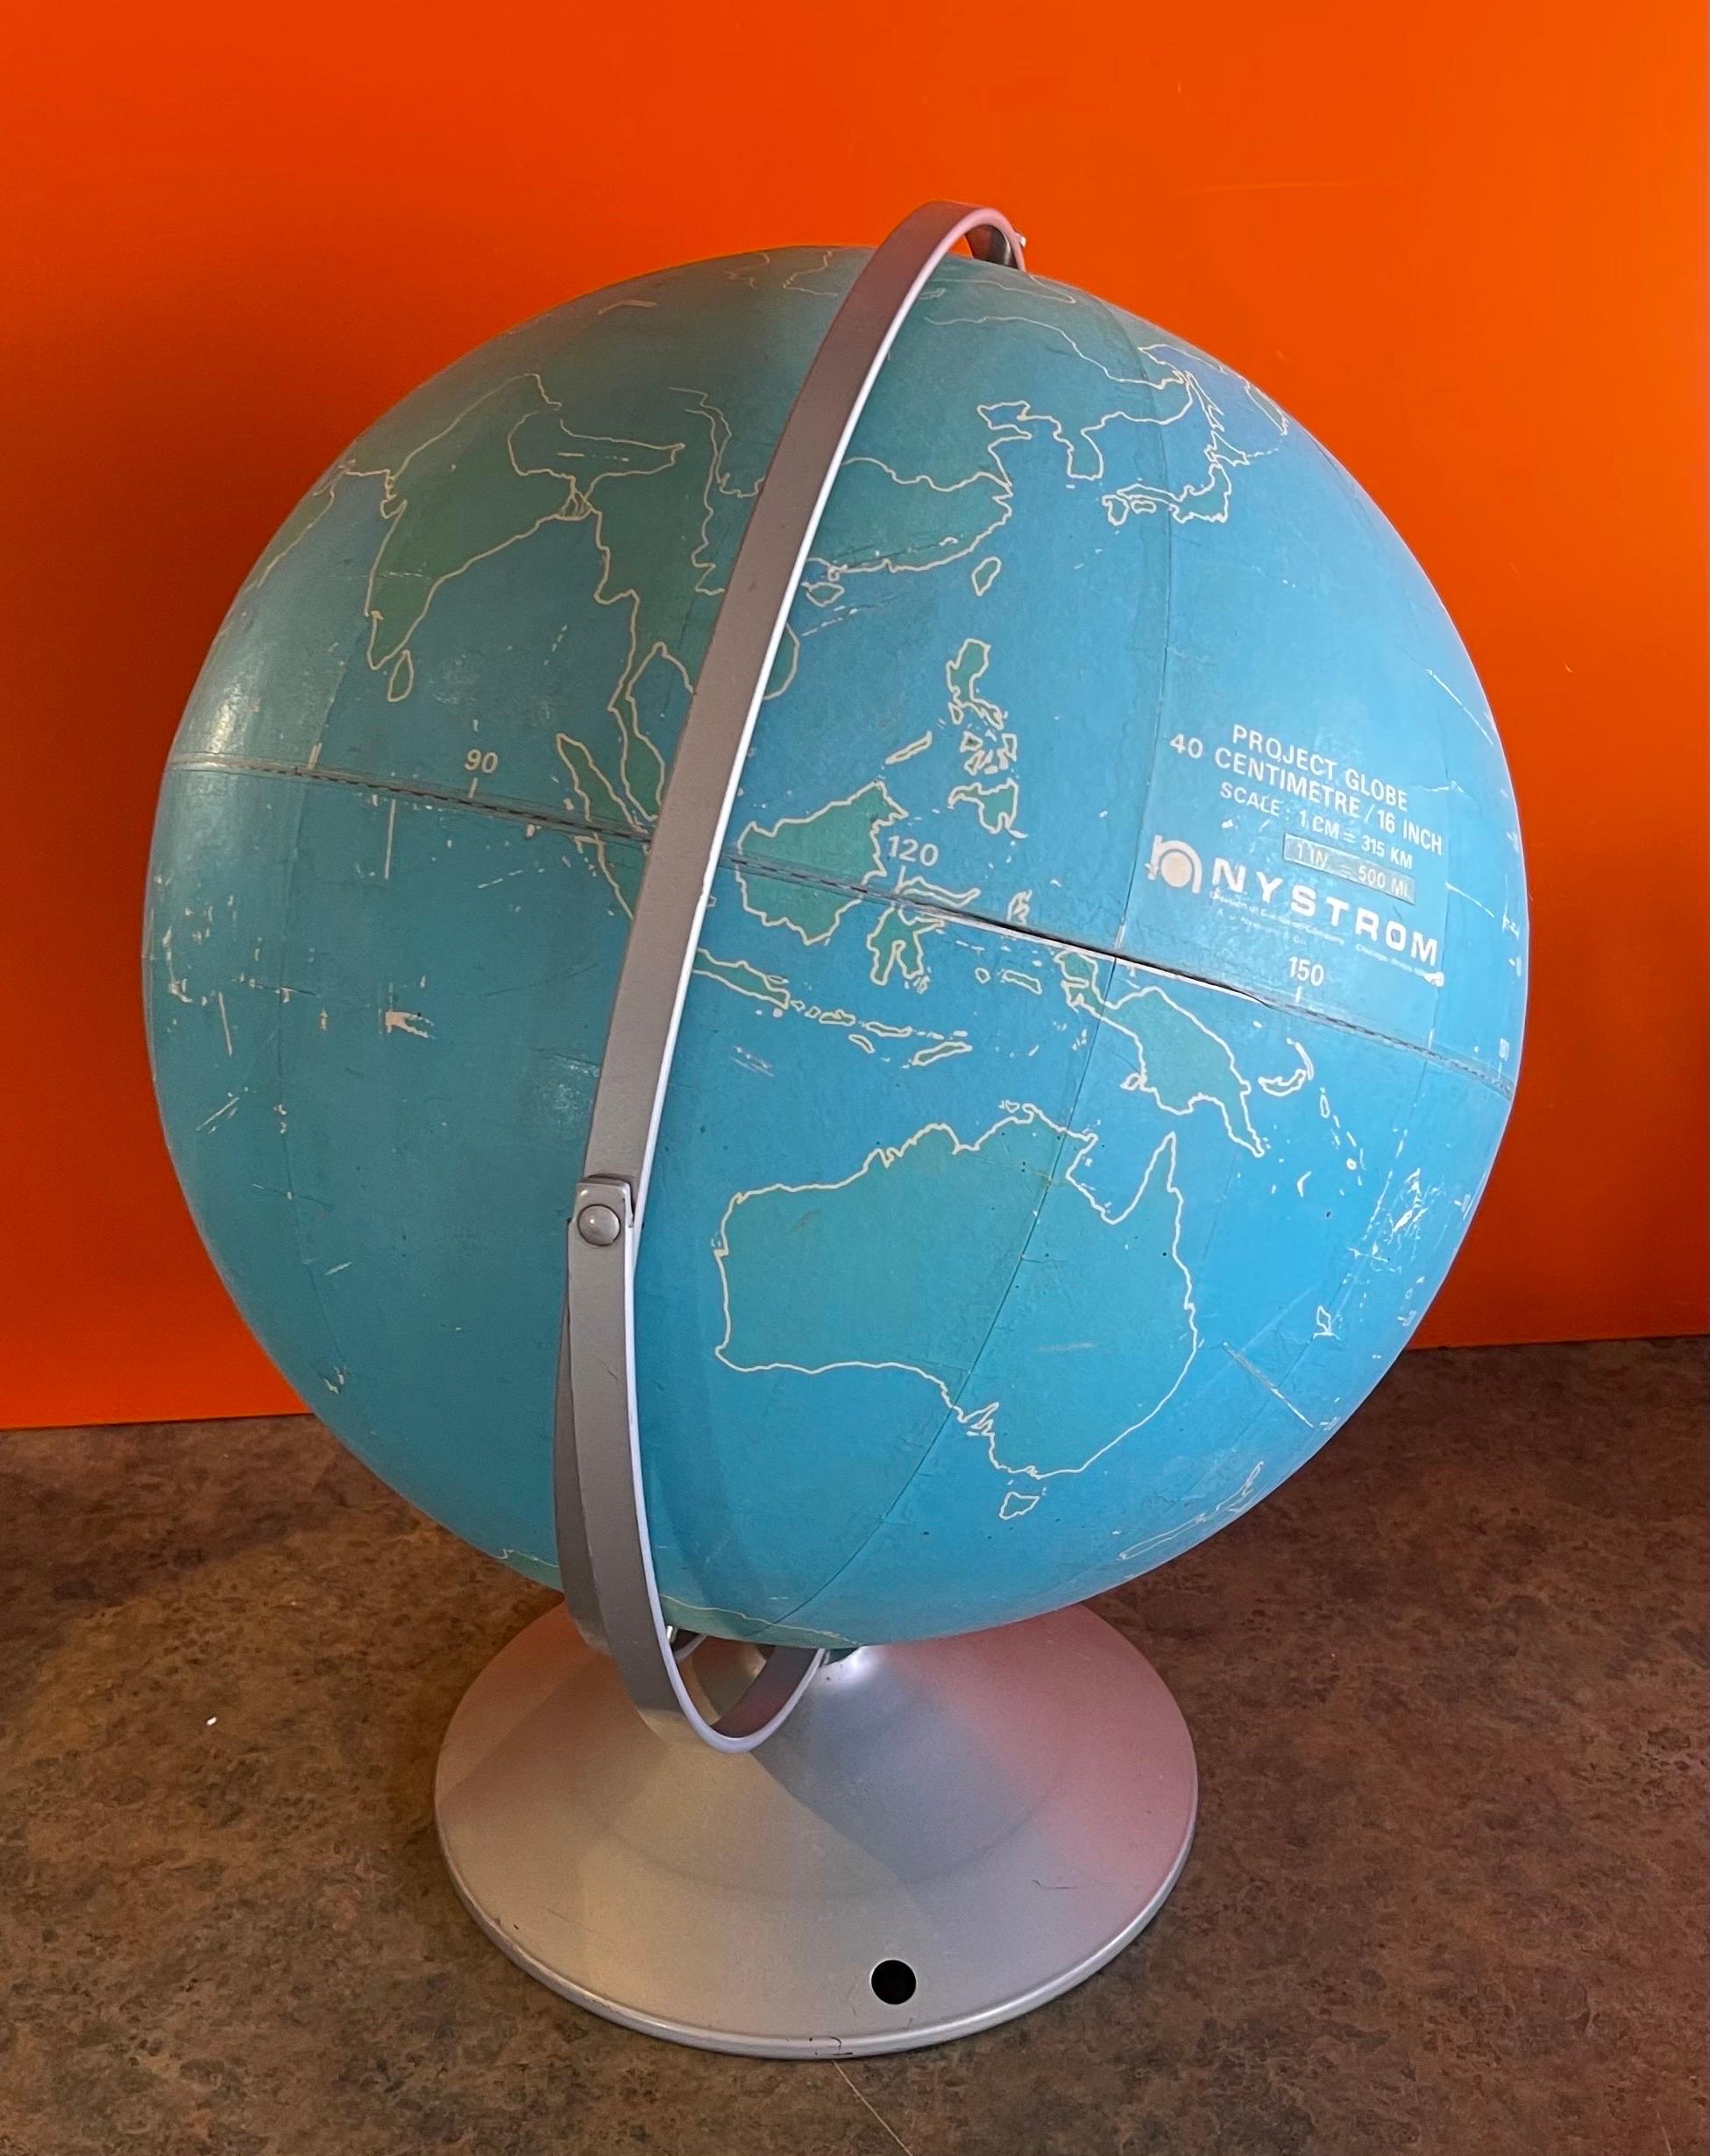 Vintage Strategy Chalk Teaching Globe on Stand by A.J. Nystrom Co 3